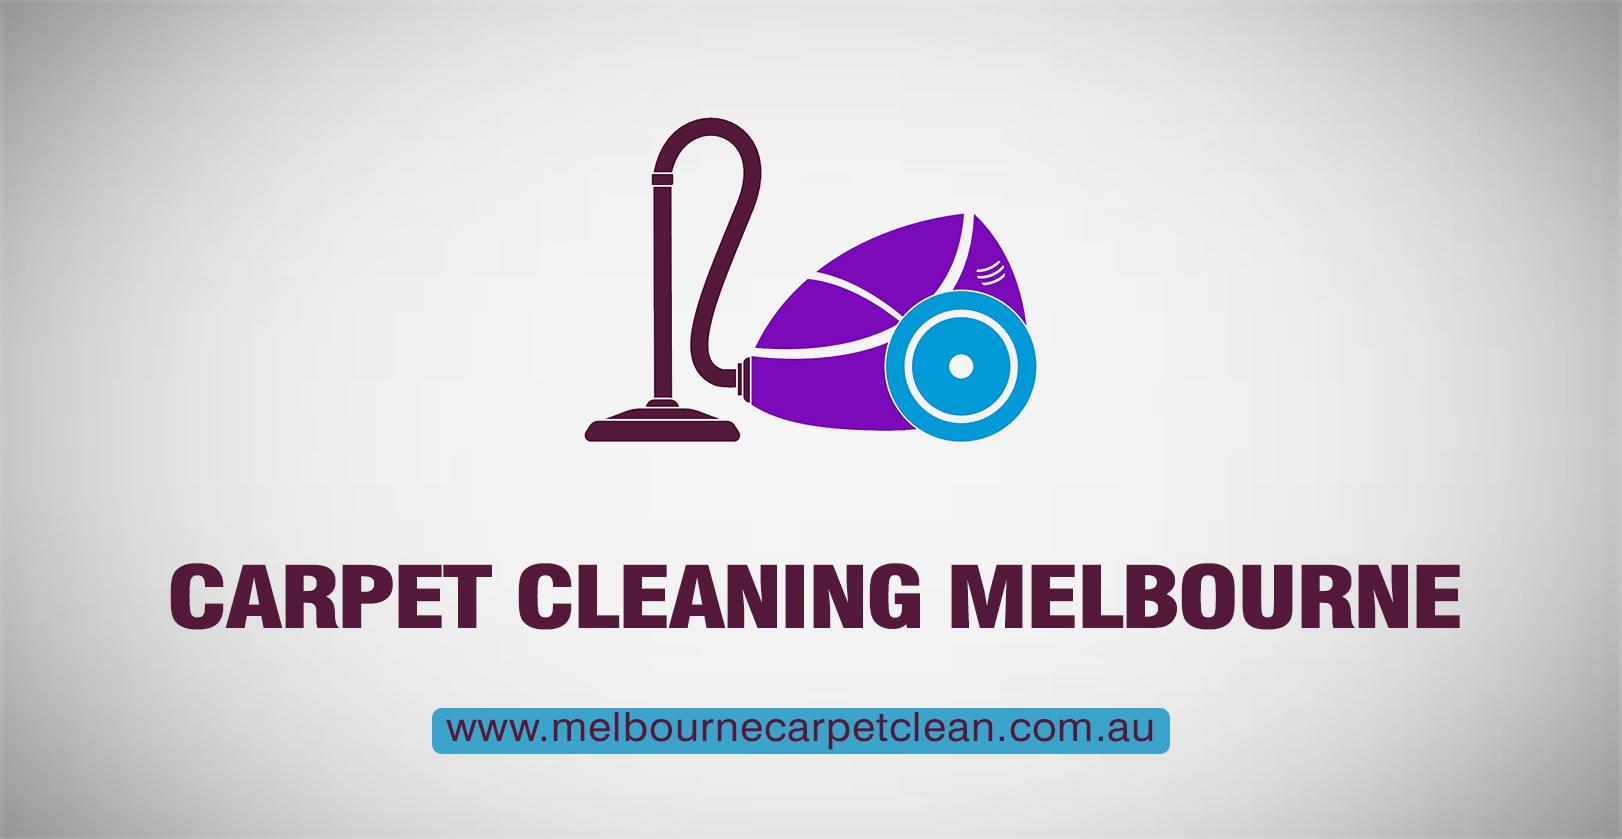 End of lease cleaning melbourne